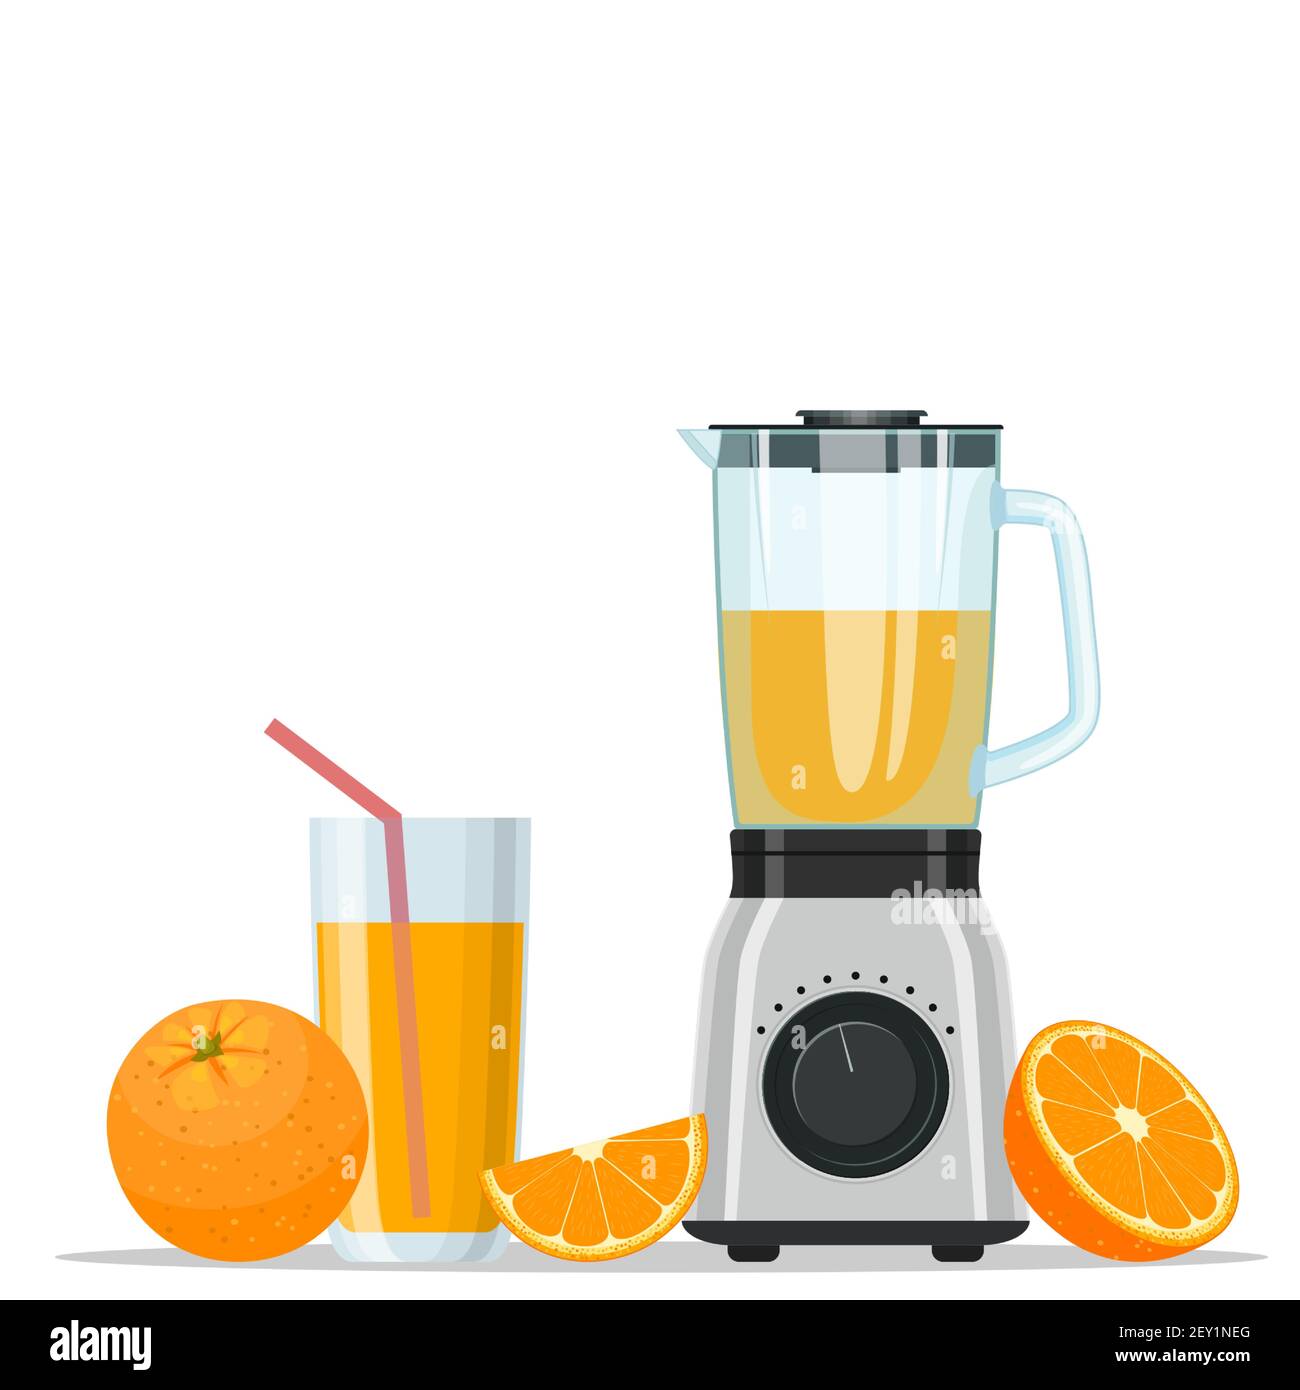 How to Use a Blender as a Juicer - Overstock.com